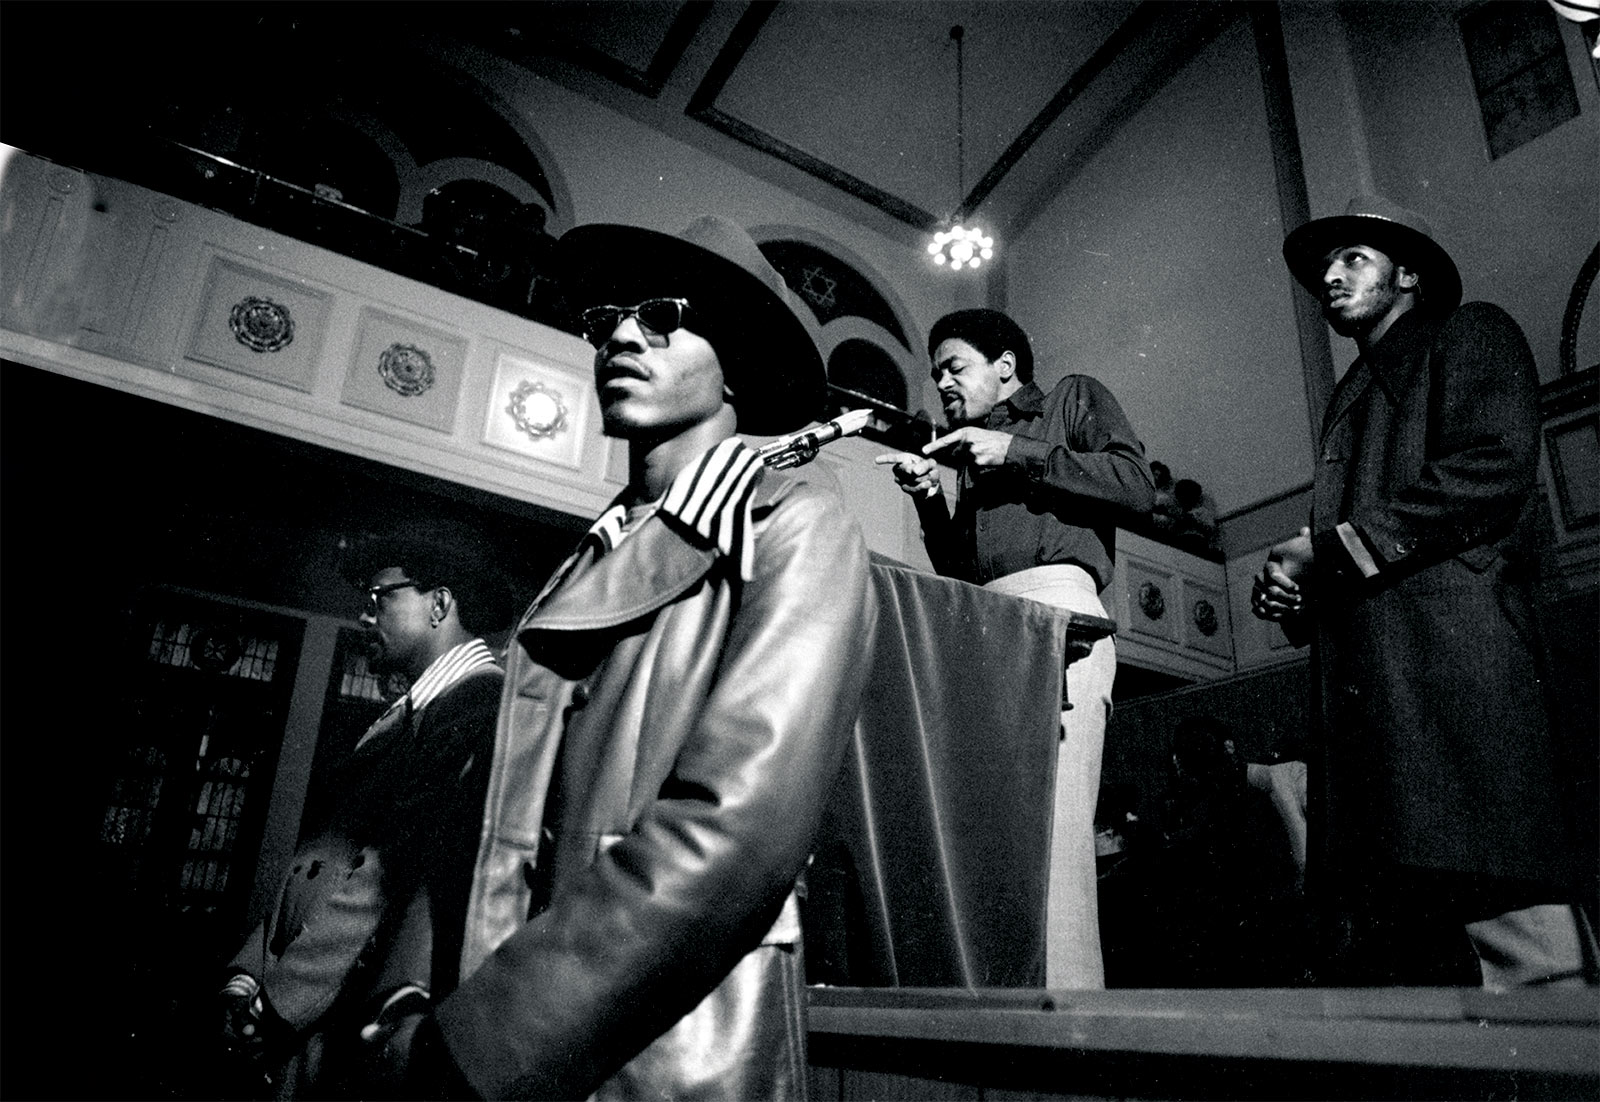 Black Panther Party leader Bobby Seale addresses a crowd from the podium flanked by bodyguards, Chicago, 1971.